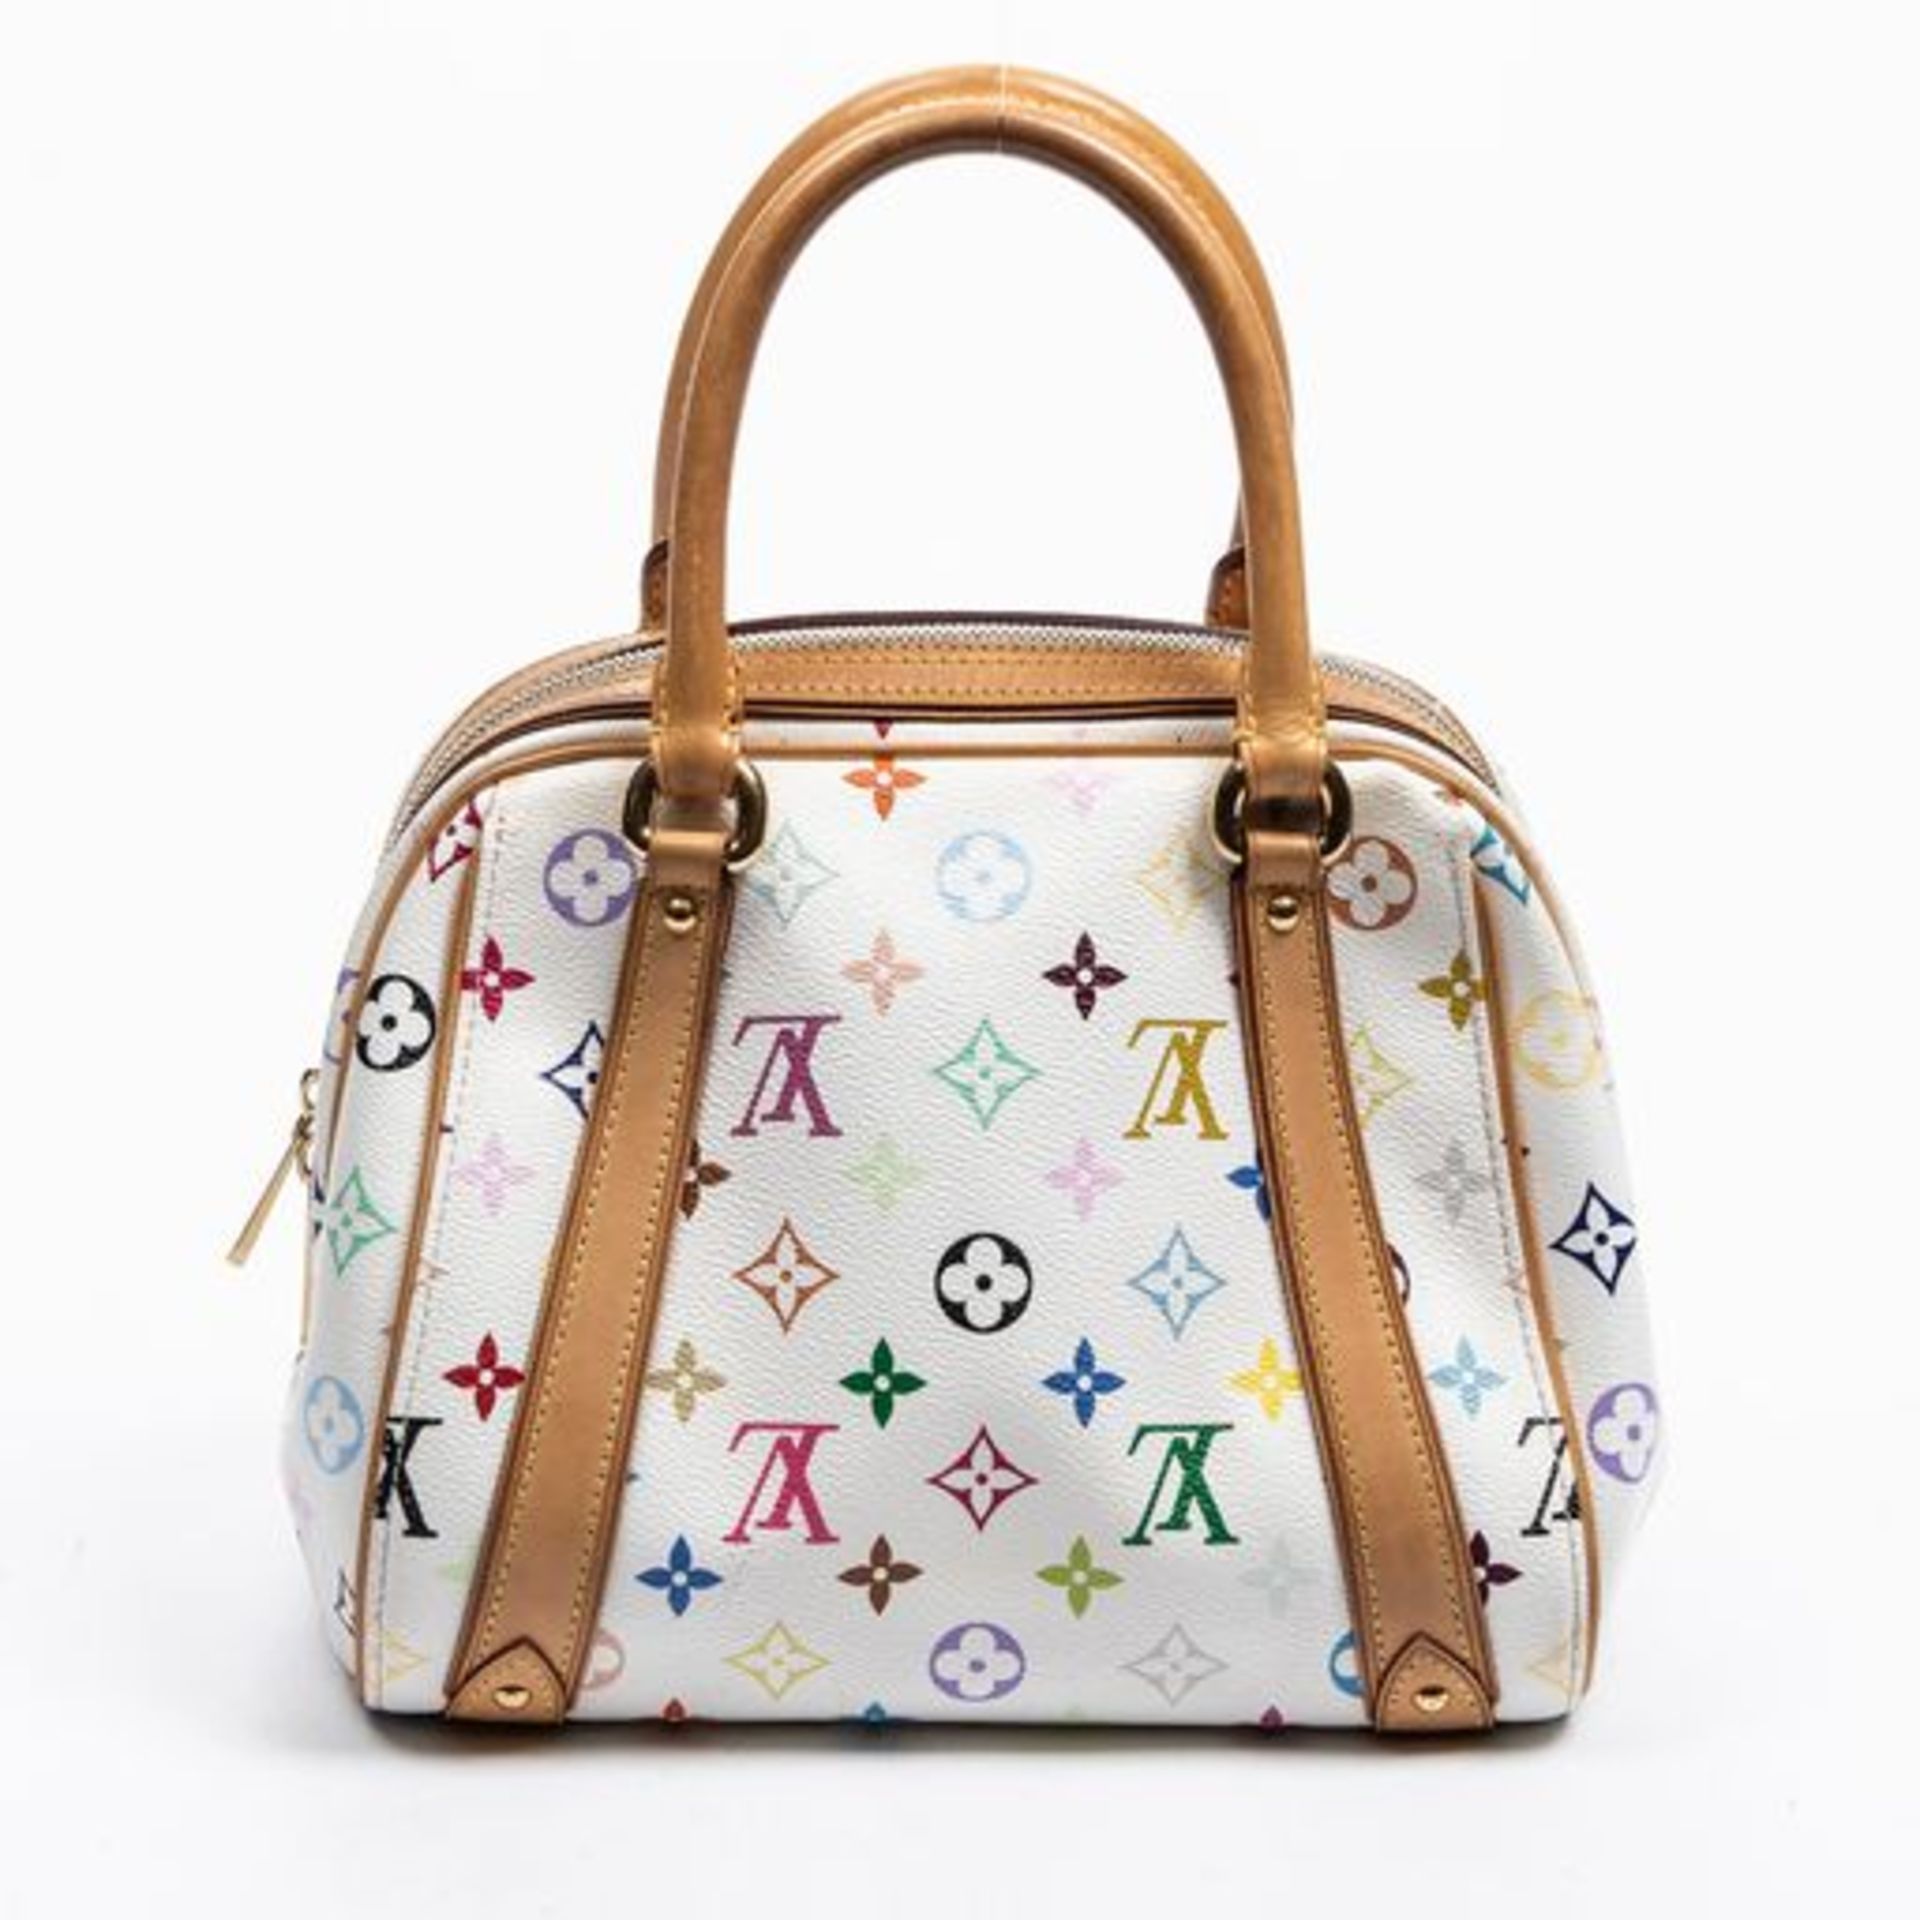 RRP £1,850.00 Lot To Contain 1 Louis Vuitton Coated Canvas Priscilla Handbag In White - 27*22*18cm - - Image 3 of 3